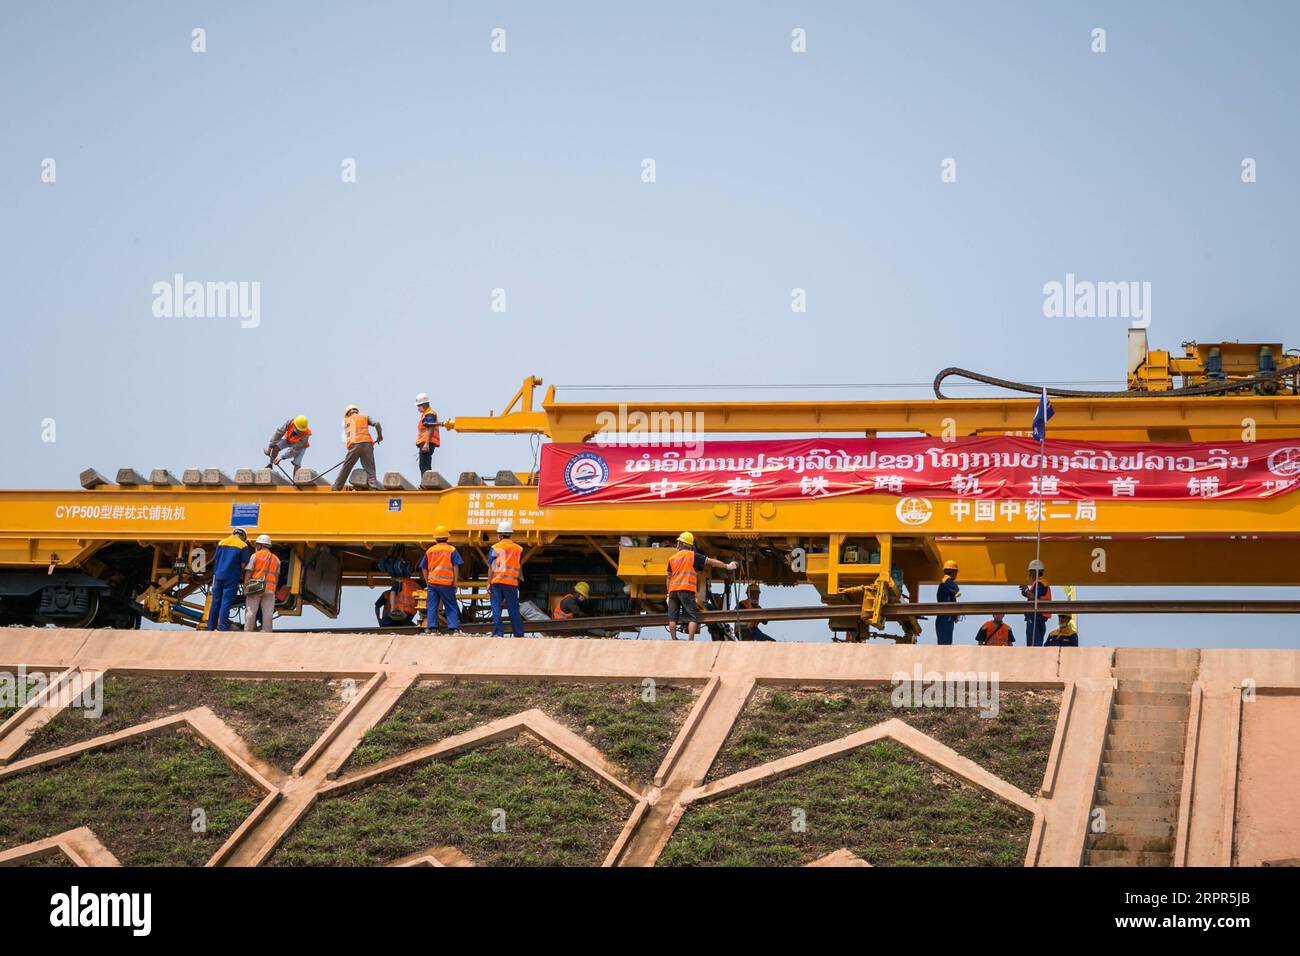 200327 -- VIENTIANE, March 27, 2020 -- Workers lay tracks at the construction site of the China-Laos railway in Vientiane, Laos, March 27, 2020. With its first 500-meter-long rail steadily laid on the subgrade, the China-Laos railway kicked off its track laying work on Friday in Lao capital Vientiane. The rail is the longest one outside China in Asia and it was also the first time the CYP500 track laying machine has been used in railway construction in Southeast Asia, said Hu Bin, project manager of the China Railway No. 2 Engineering Group CREC-2. Photo by Saiyasane/Xinhua LAOS-VIENTIANE-CHIN Stock Photo